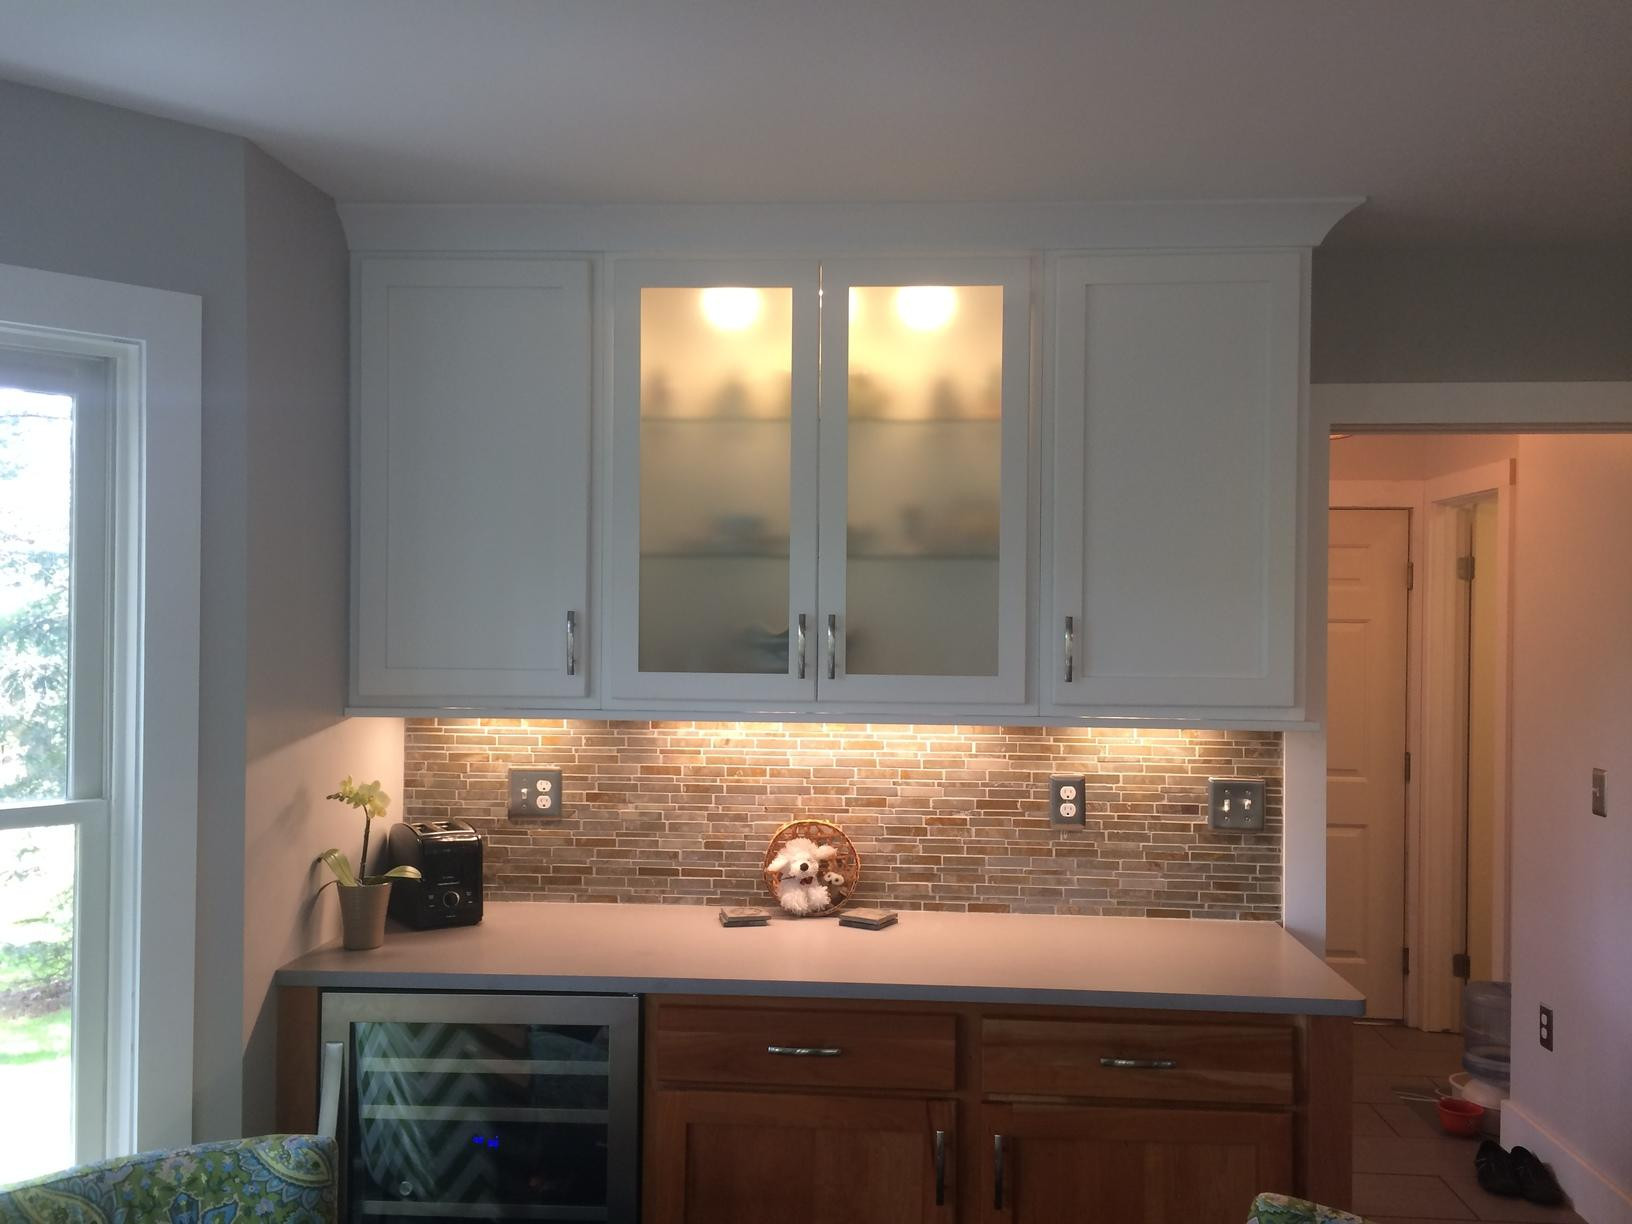 Inside Kitchen Cabinet Lighting
 Residential Electrical Services Kitchen Lighting in